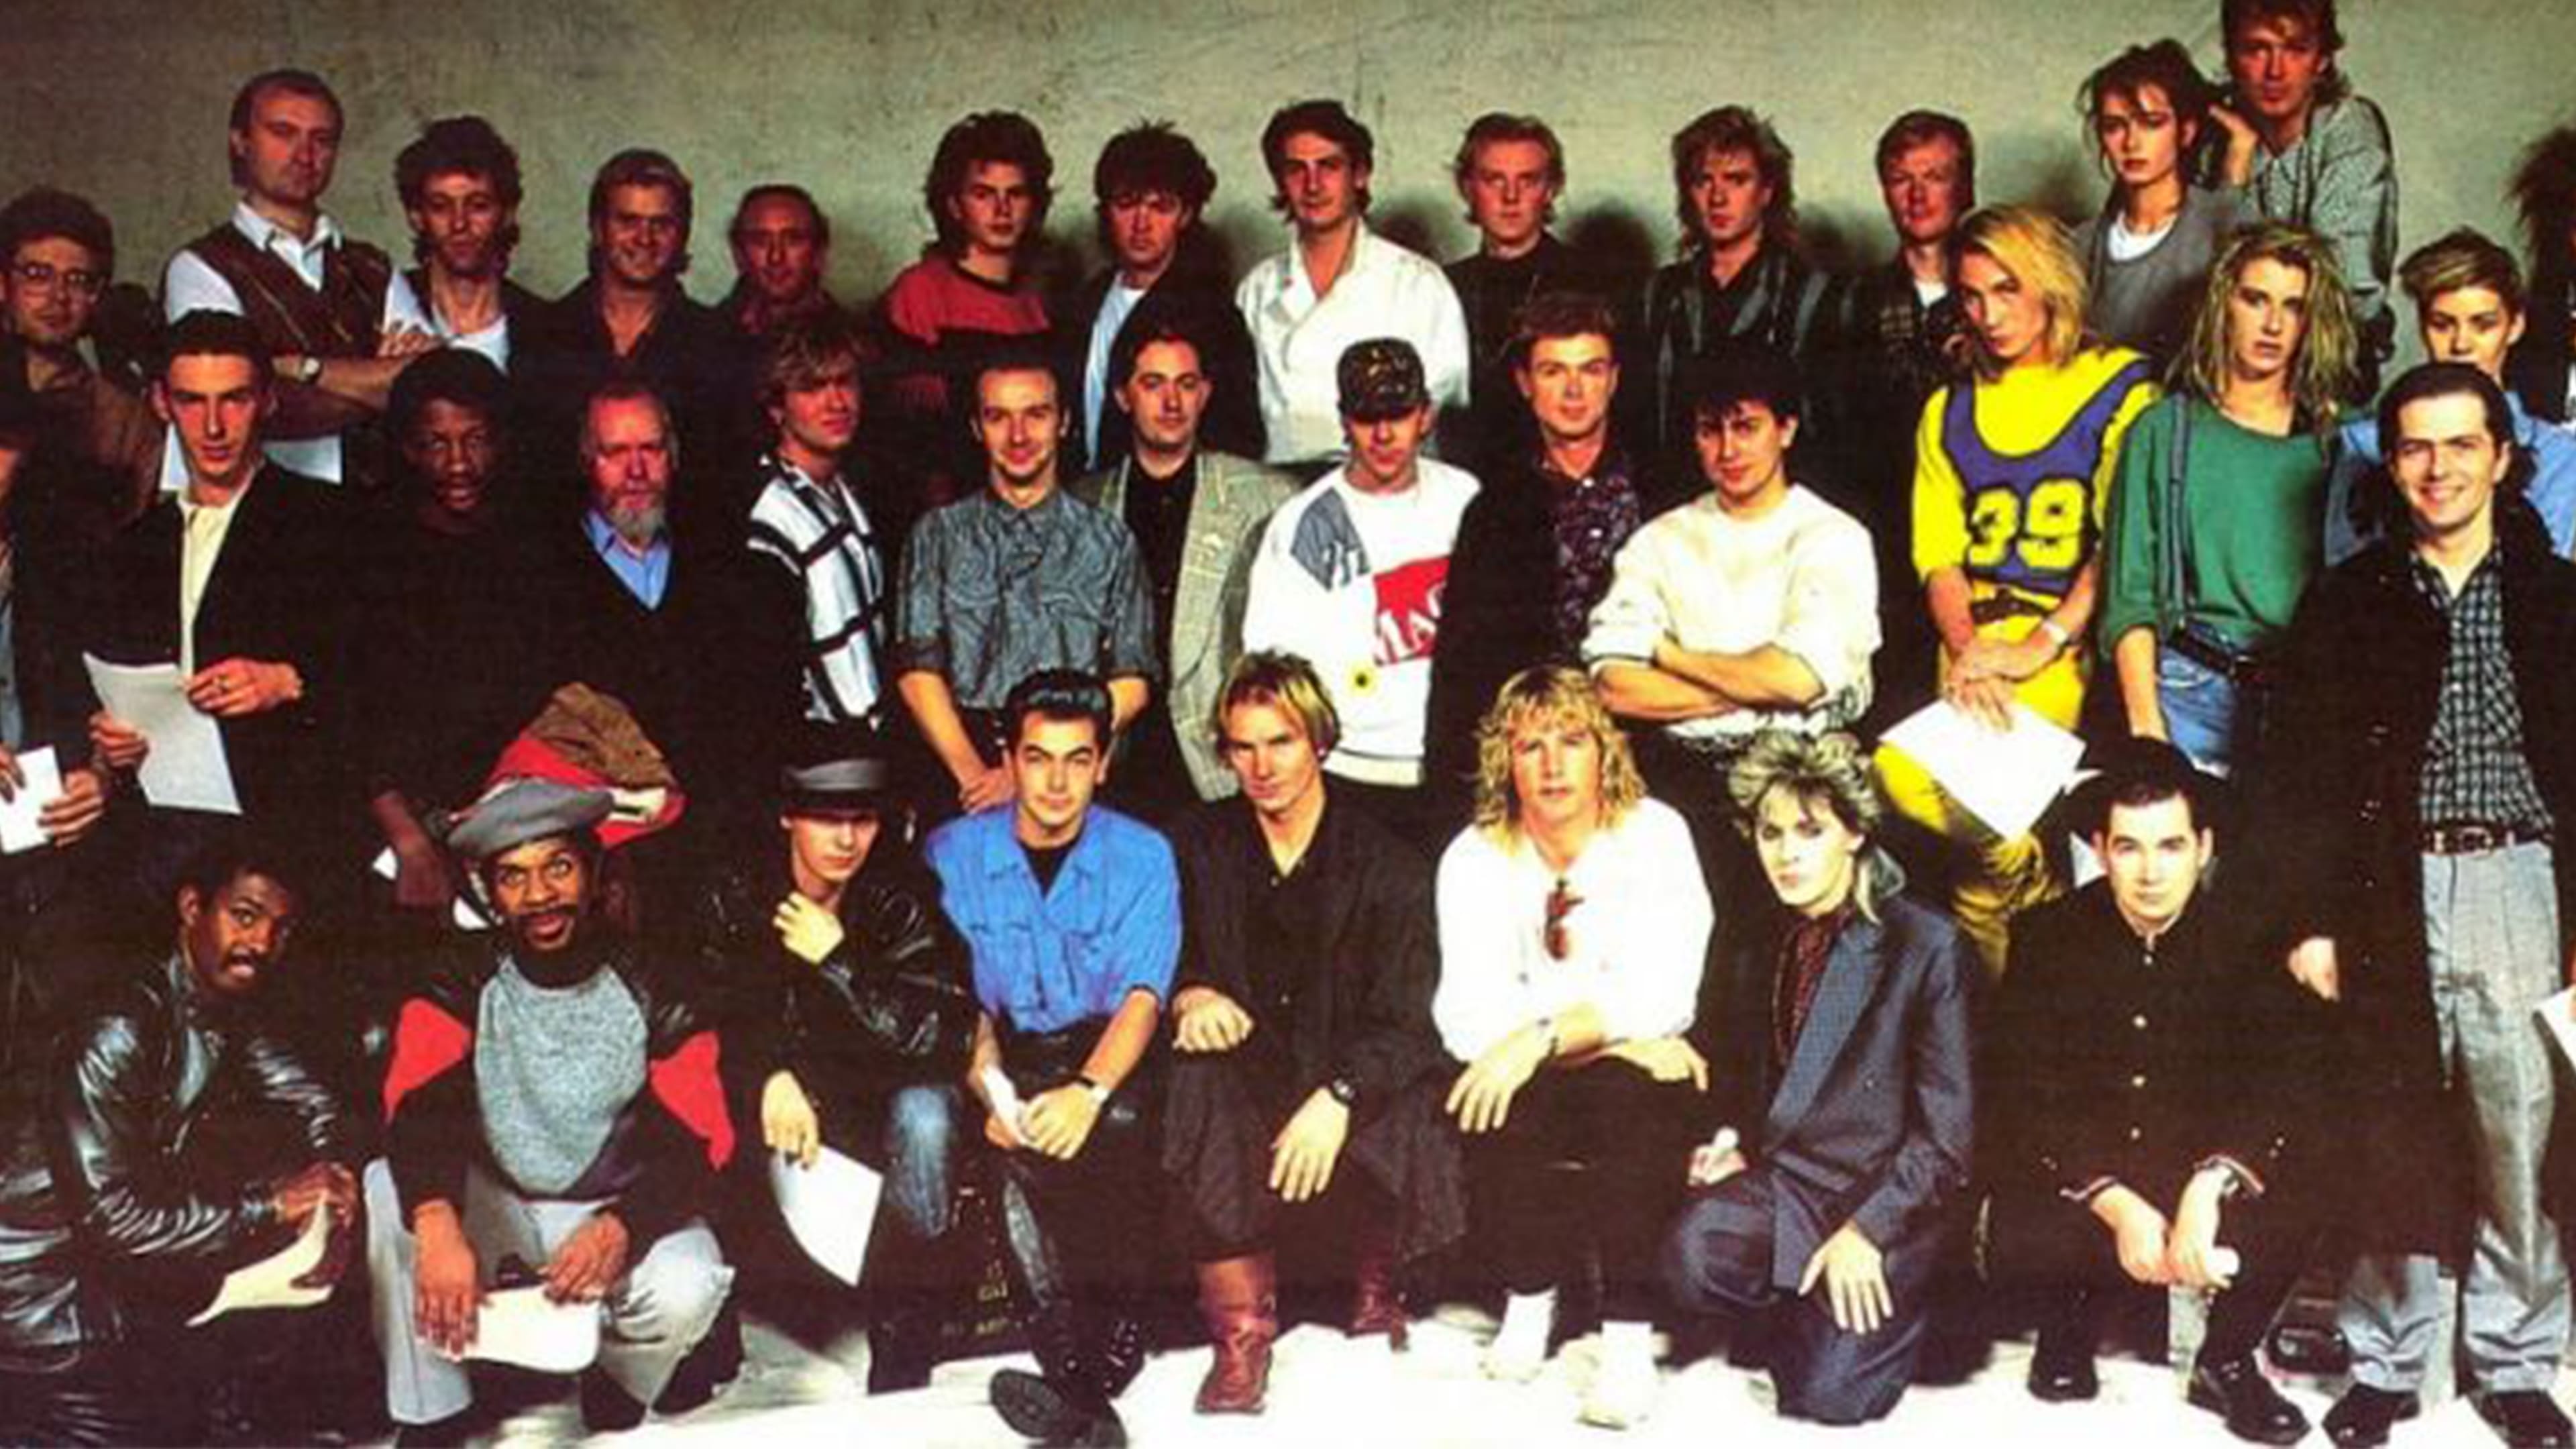 'Do They Know It's Christmas?' - The Story Of The Official Band Aid Video (1984)